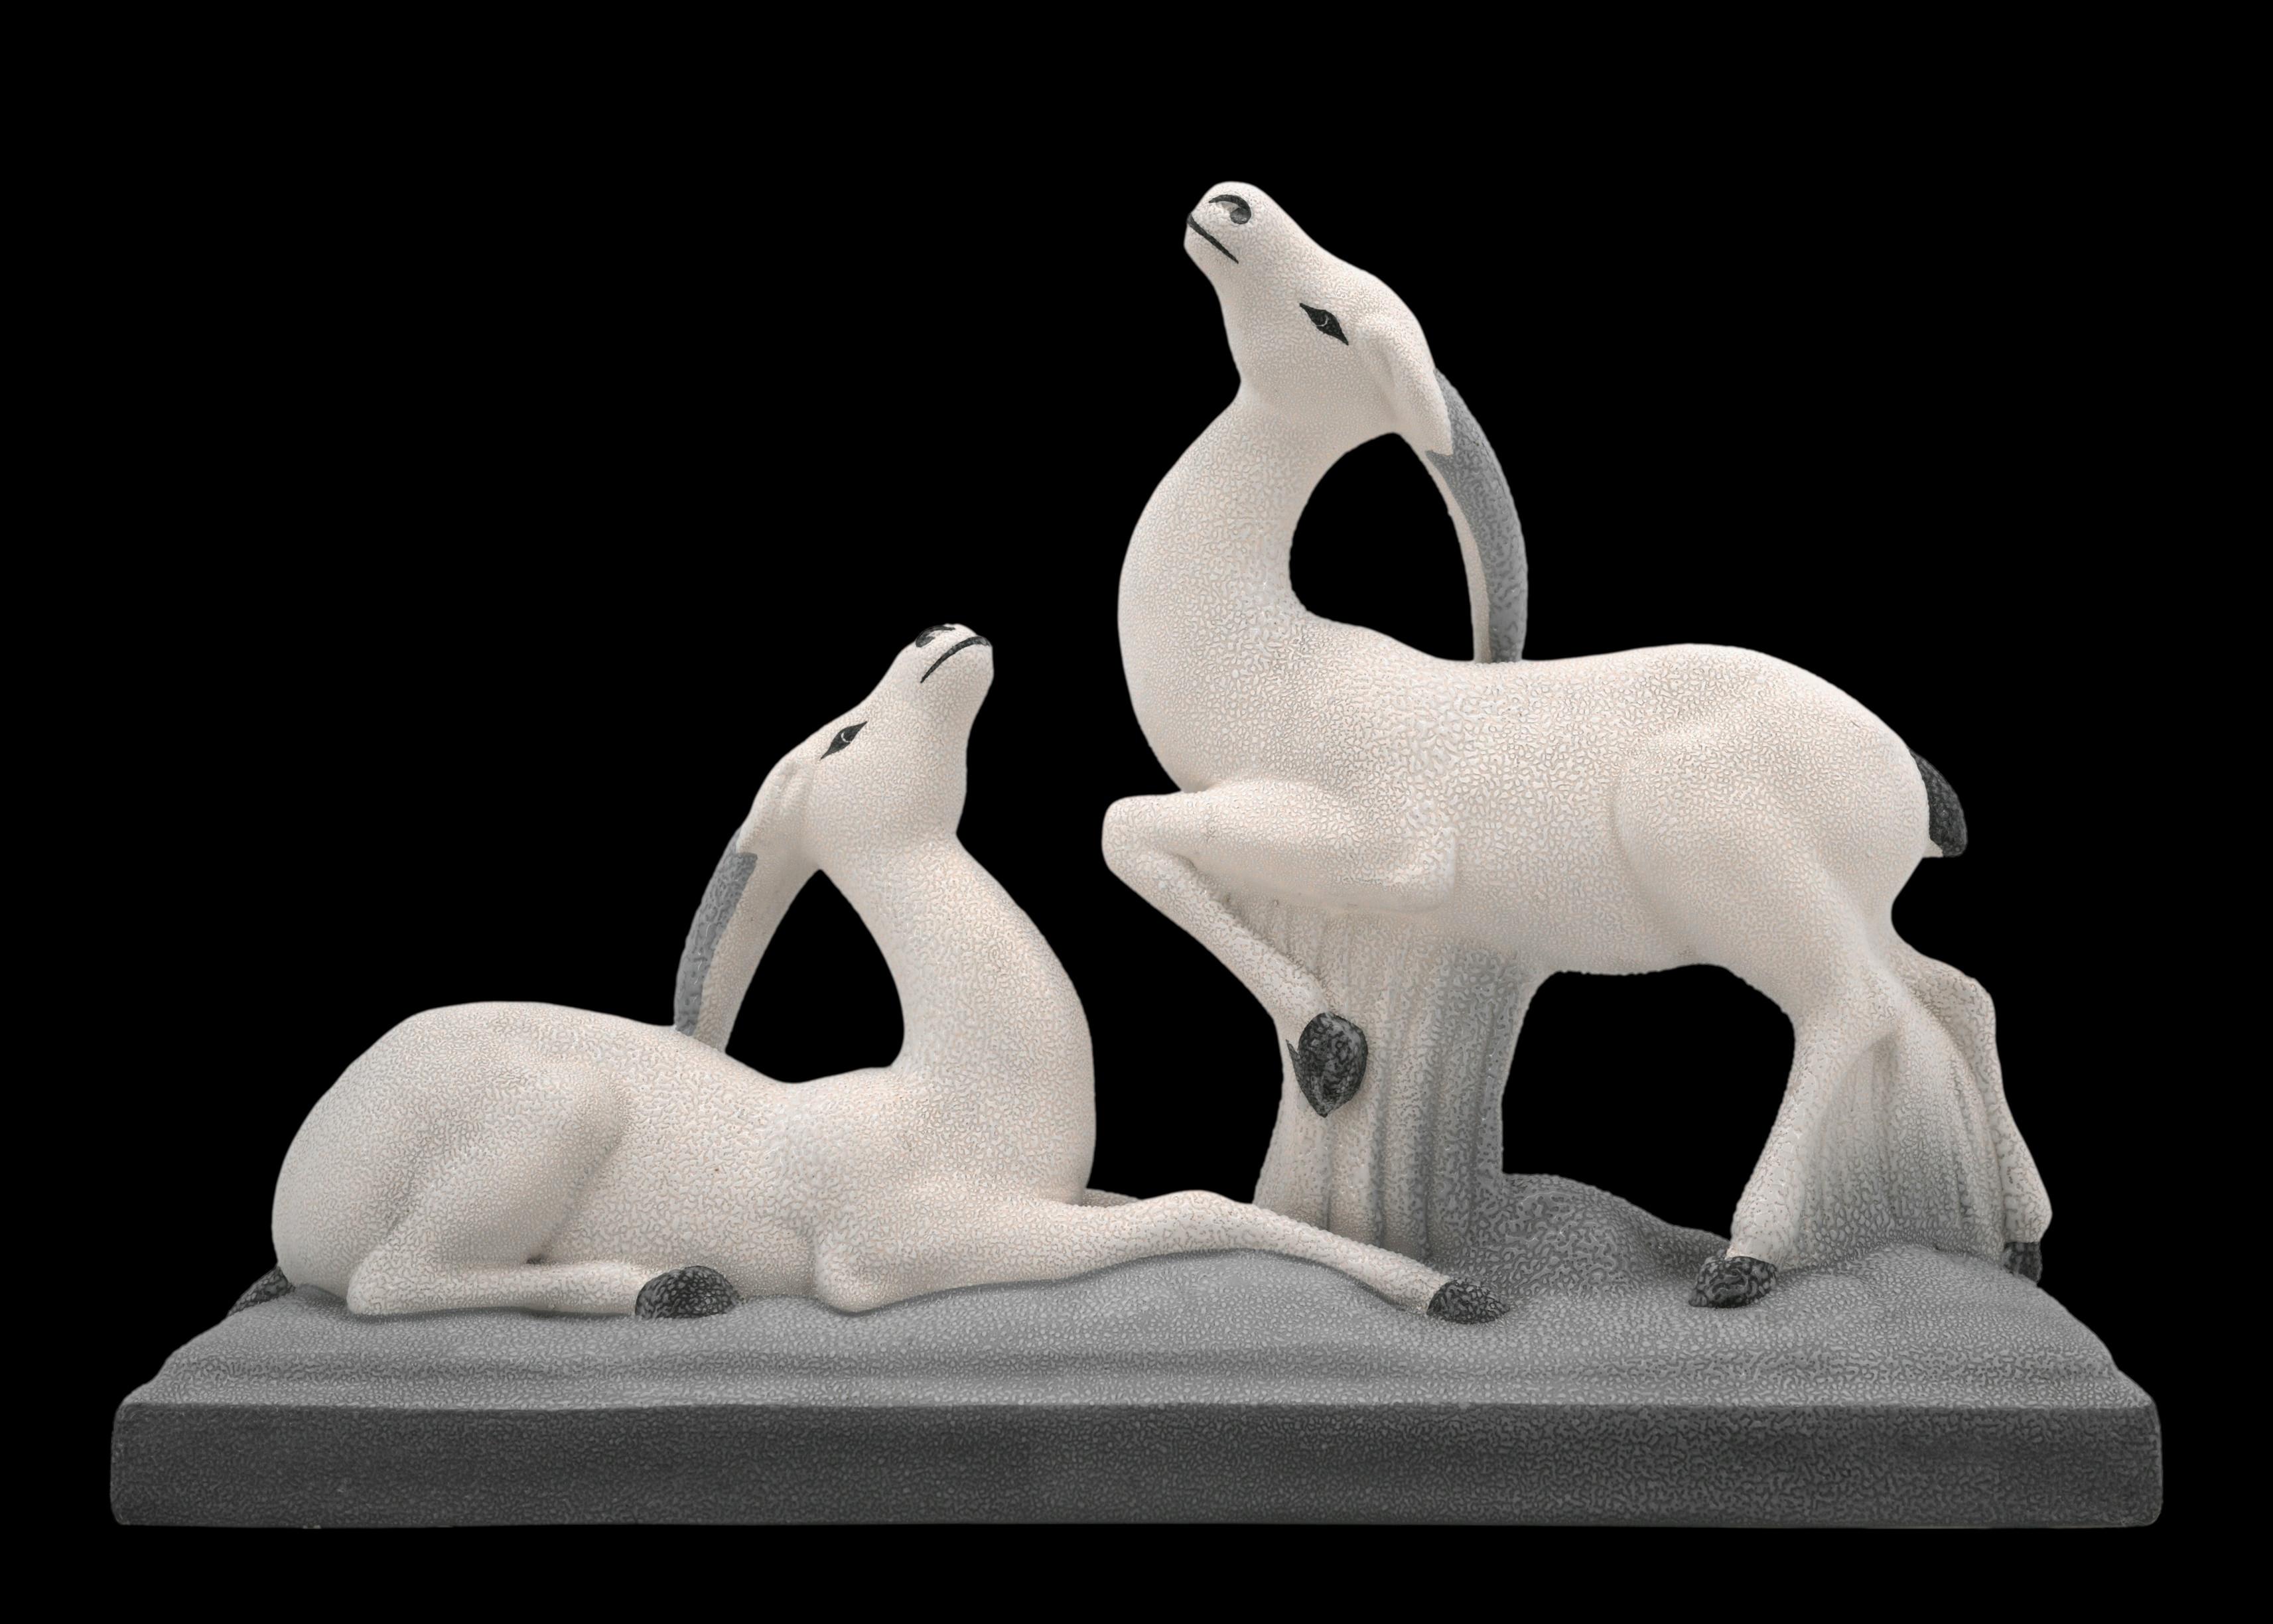 French Art Deco antelope couple sculpture by Charles LEMANCEAU at Sainte-Radegonde, France, 1930. Illustrated in the Sainte-Radegonde catalogue, page #8 (see photo). Measures: Width: 19.1